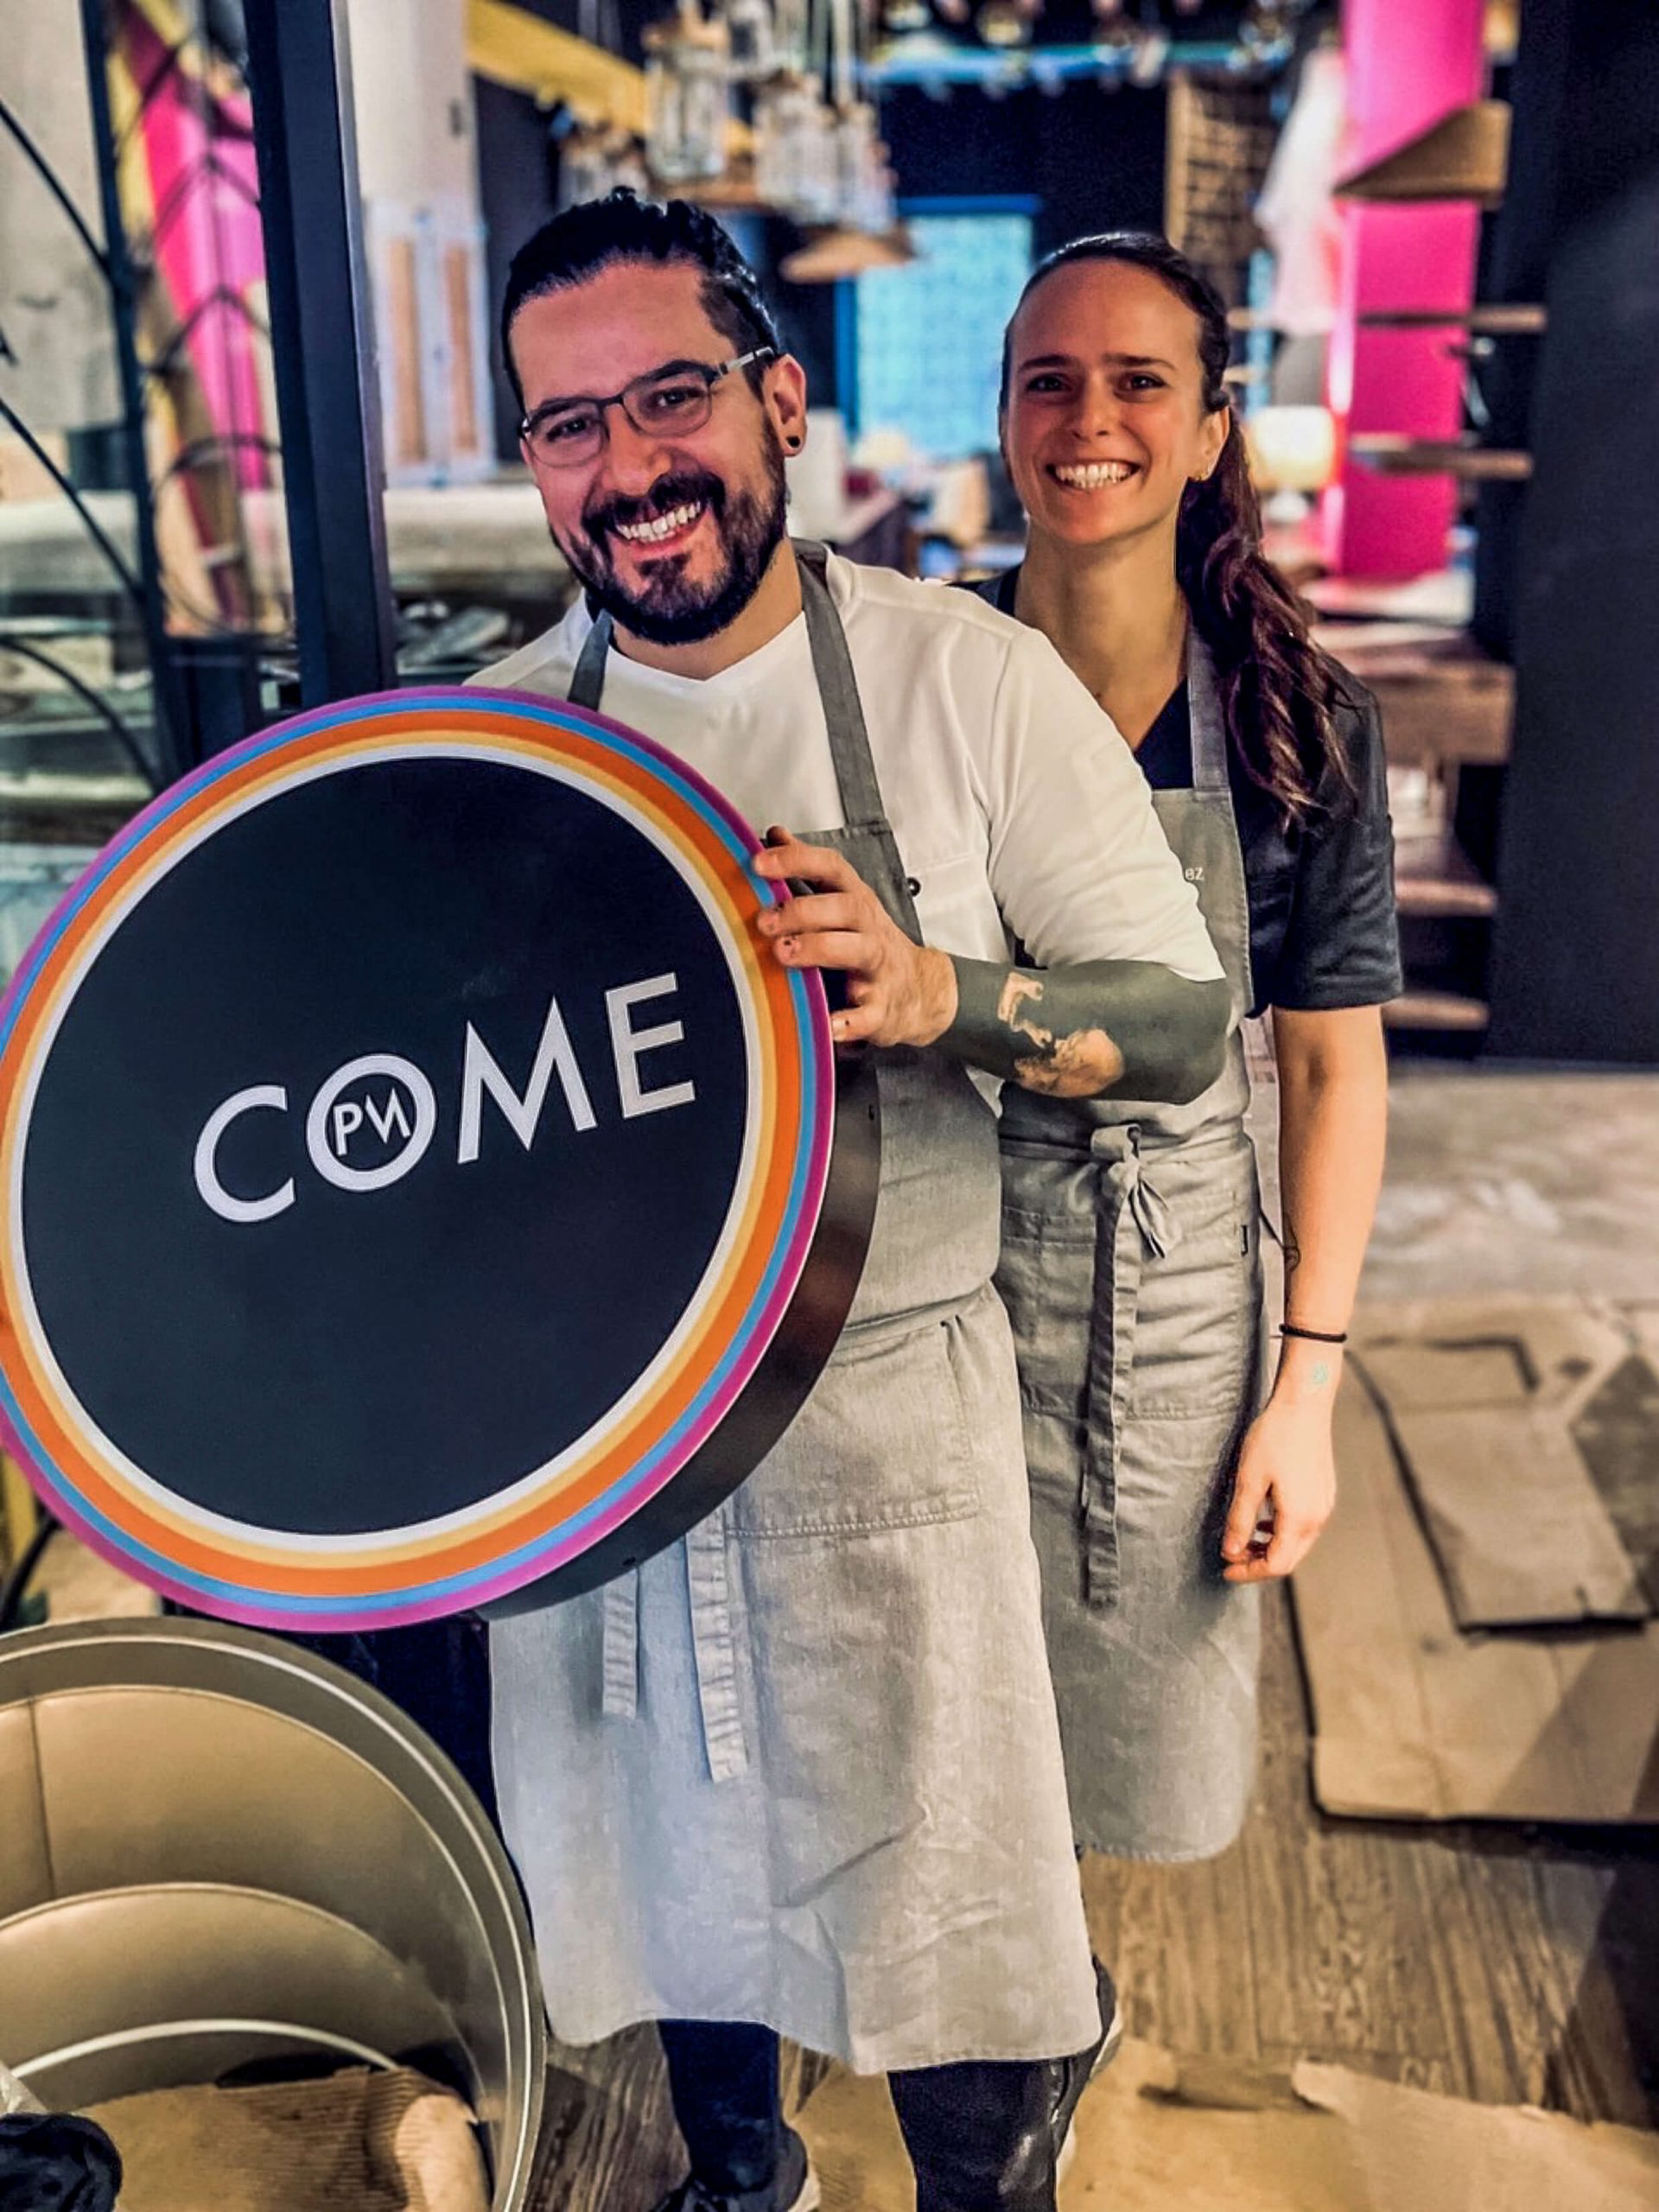 Paco Méndez with his wife in his new restaurant "Come"